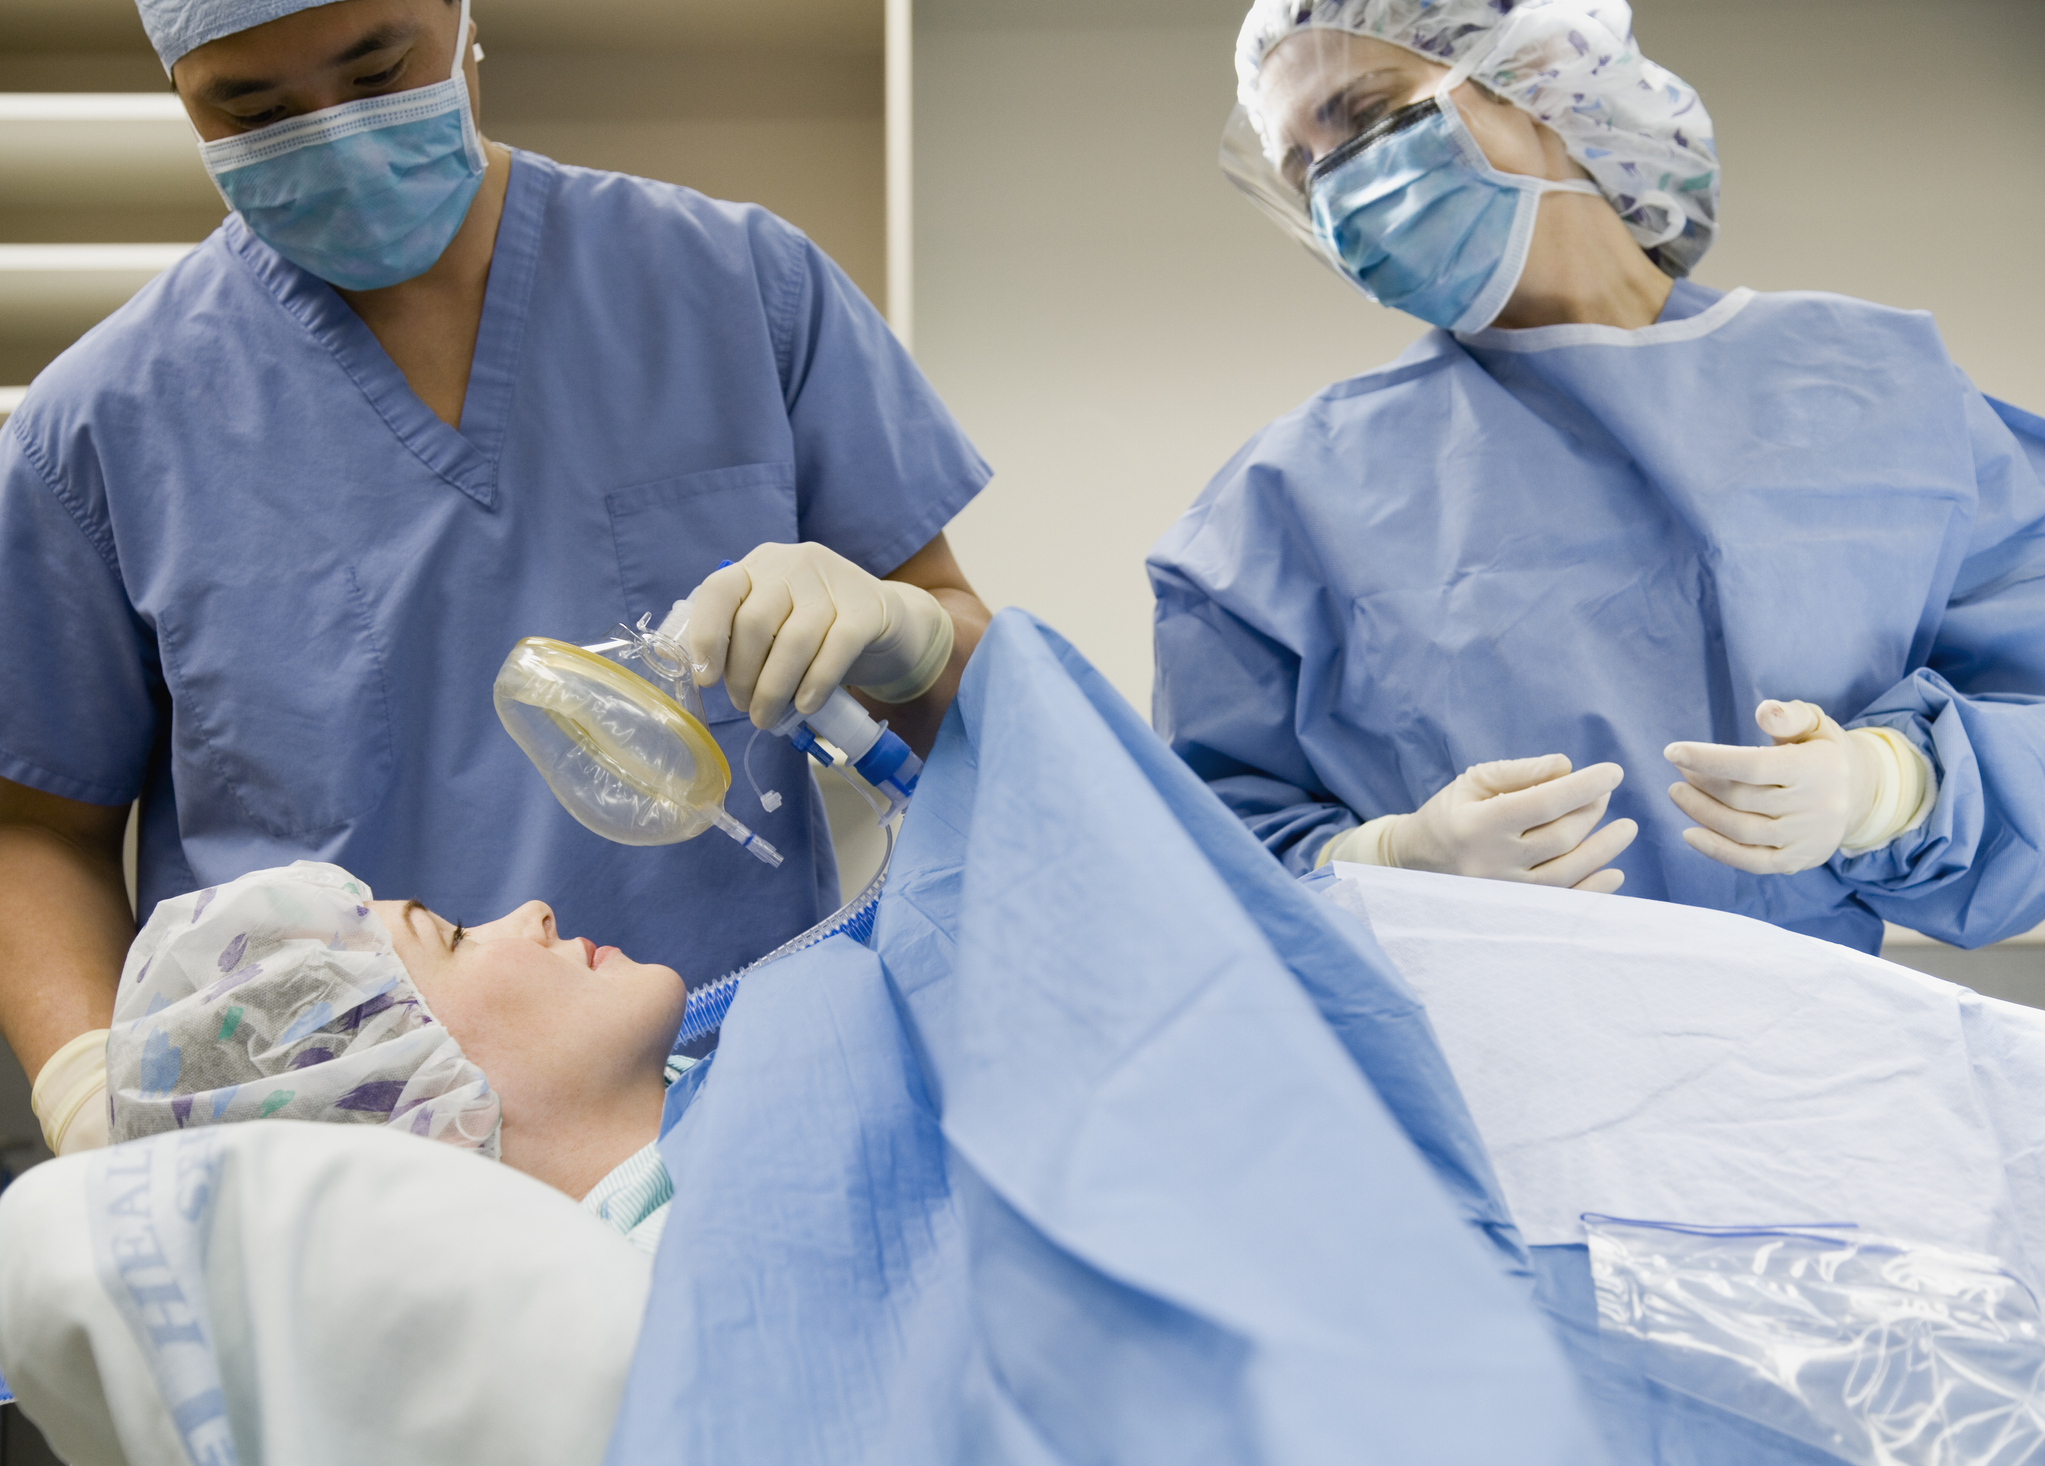 Nurse supplying patient with anesthesia beside surgeon